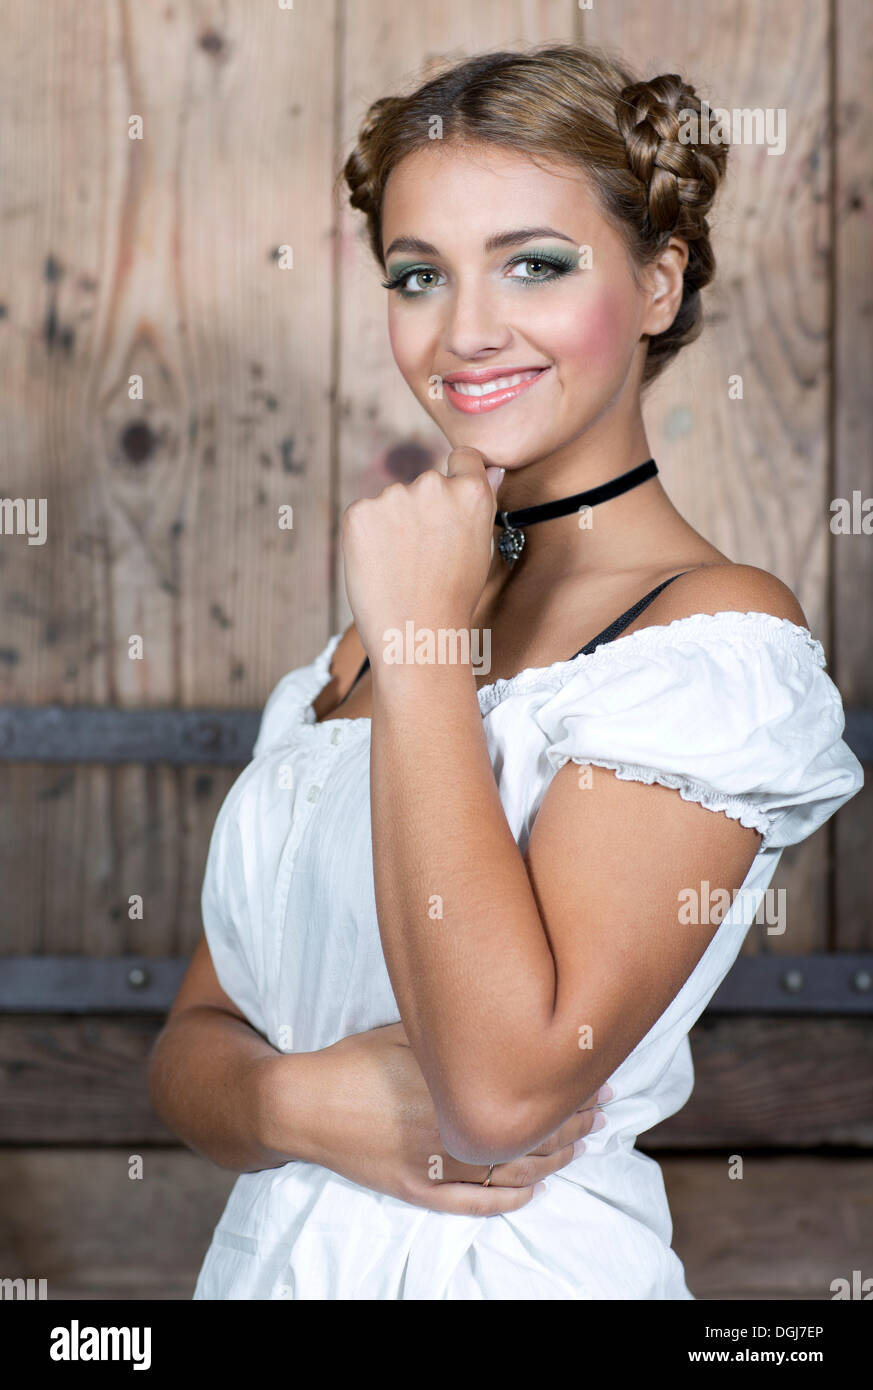 Young smiling woman wearing a white dirndl top, portrait, dirndl look Stock Photo